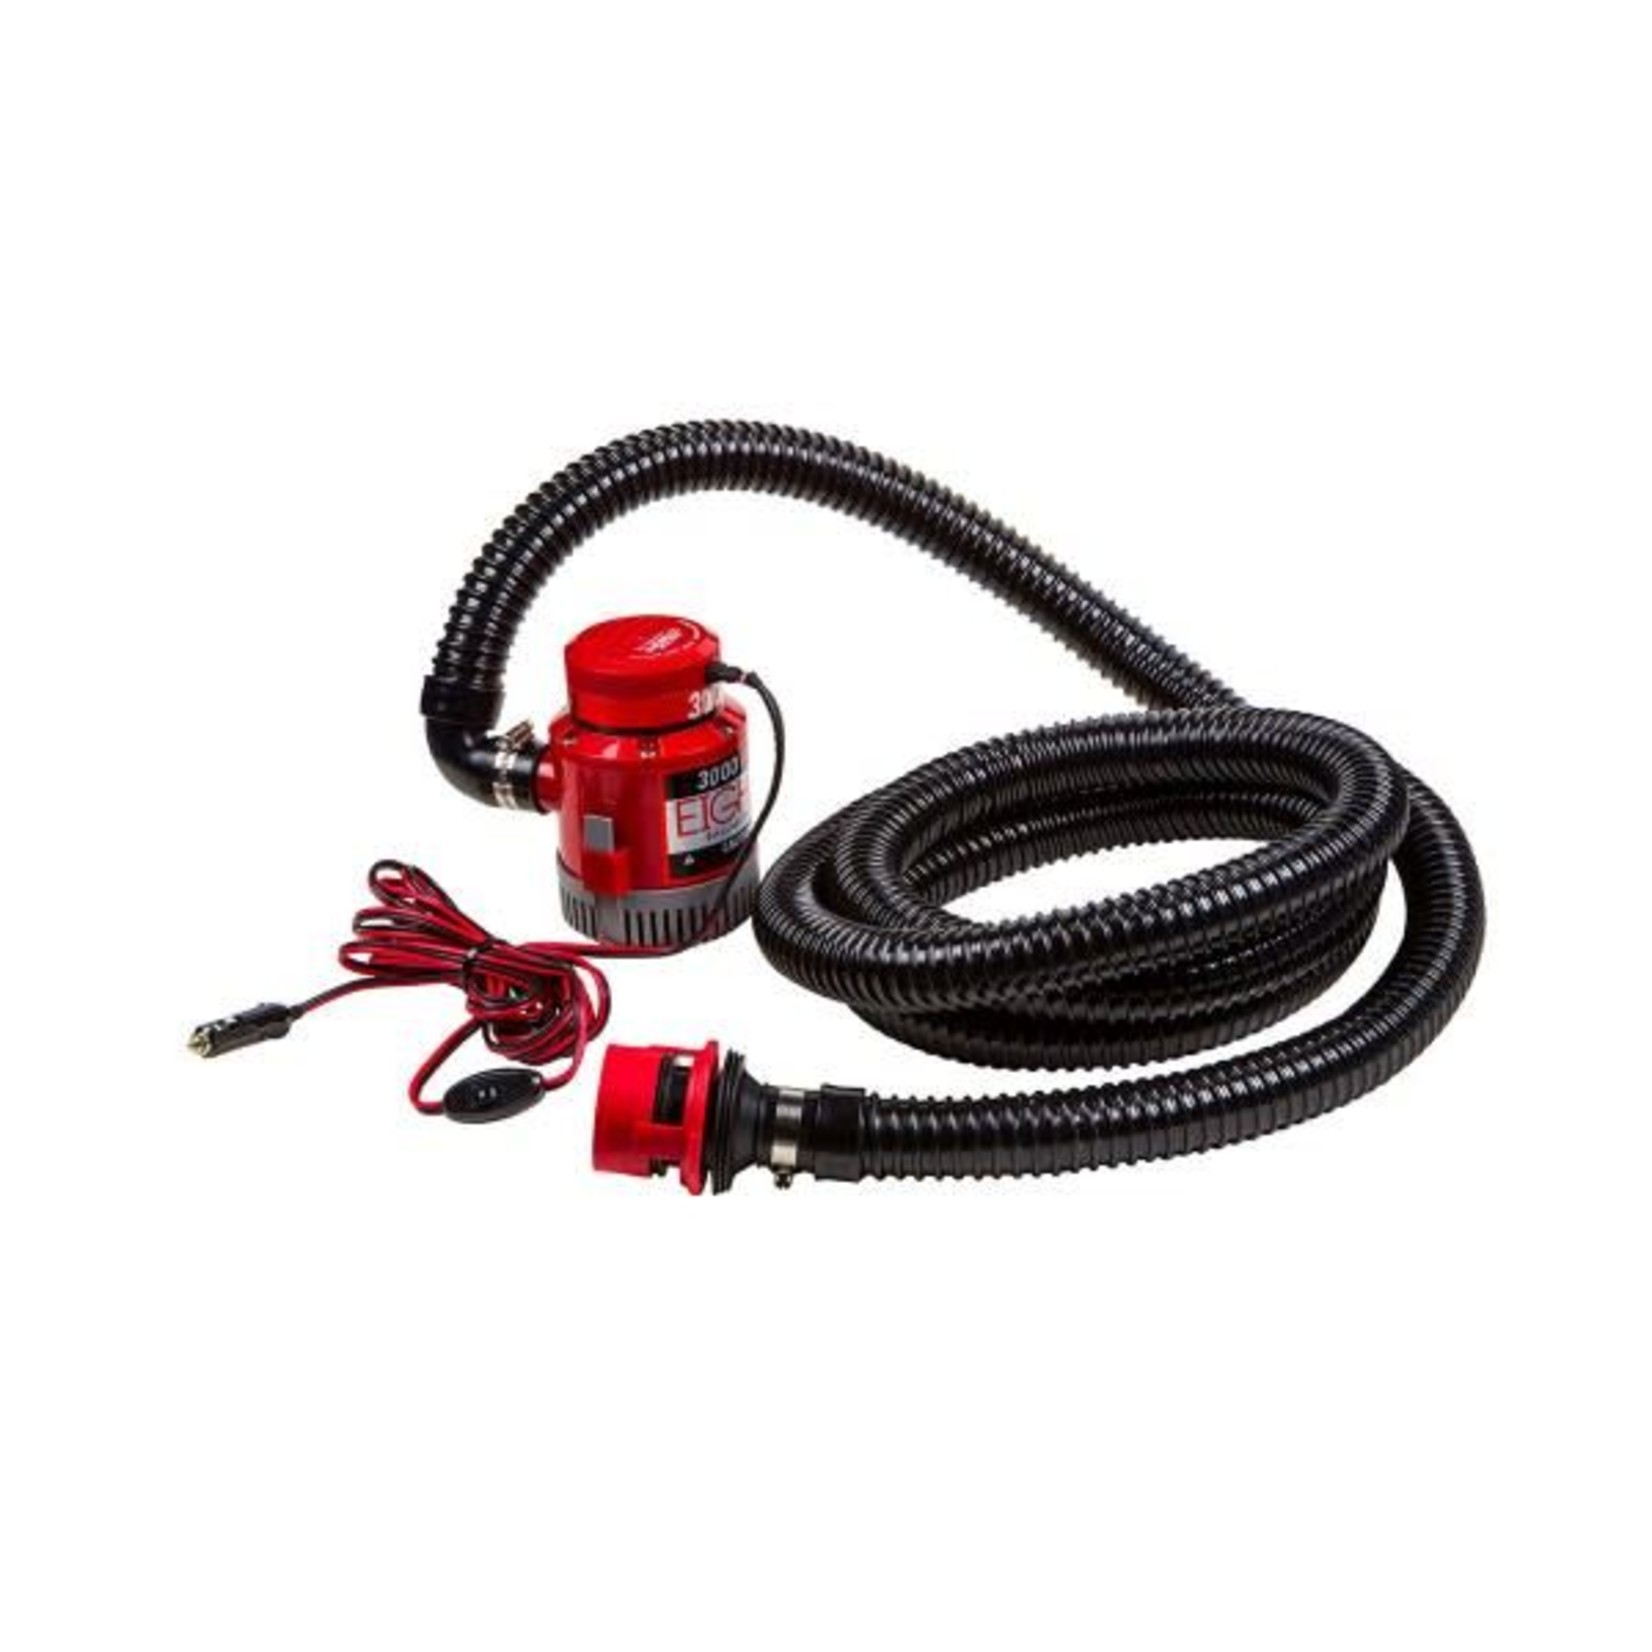 Ronix Eight.3 Submersible Pump